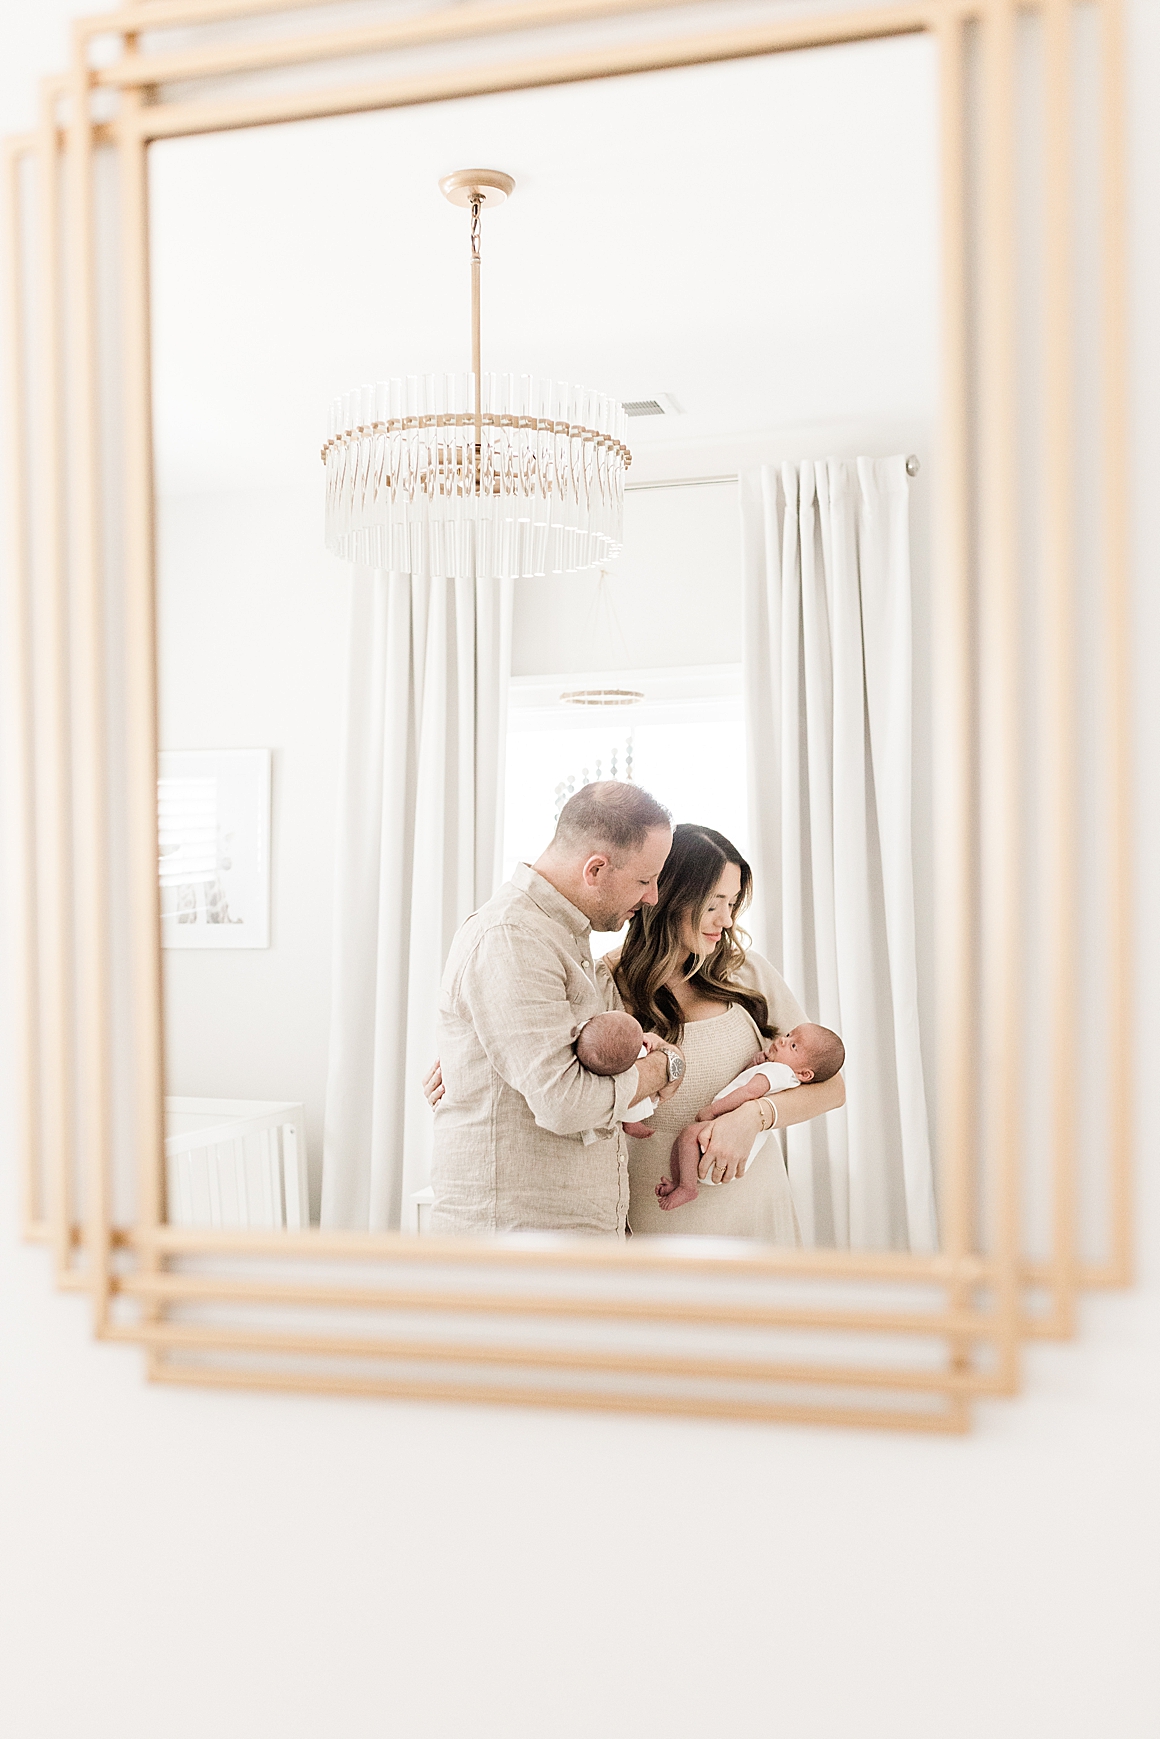 Lifestyle newborn session with twins in a beautiful, neutral nursery. Photos by Charleston Baby Photographer, Caitlyn Motycka Photography.